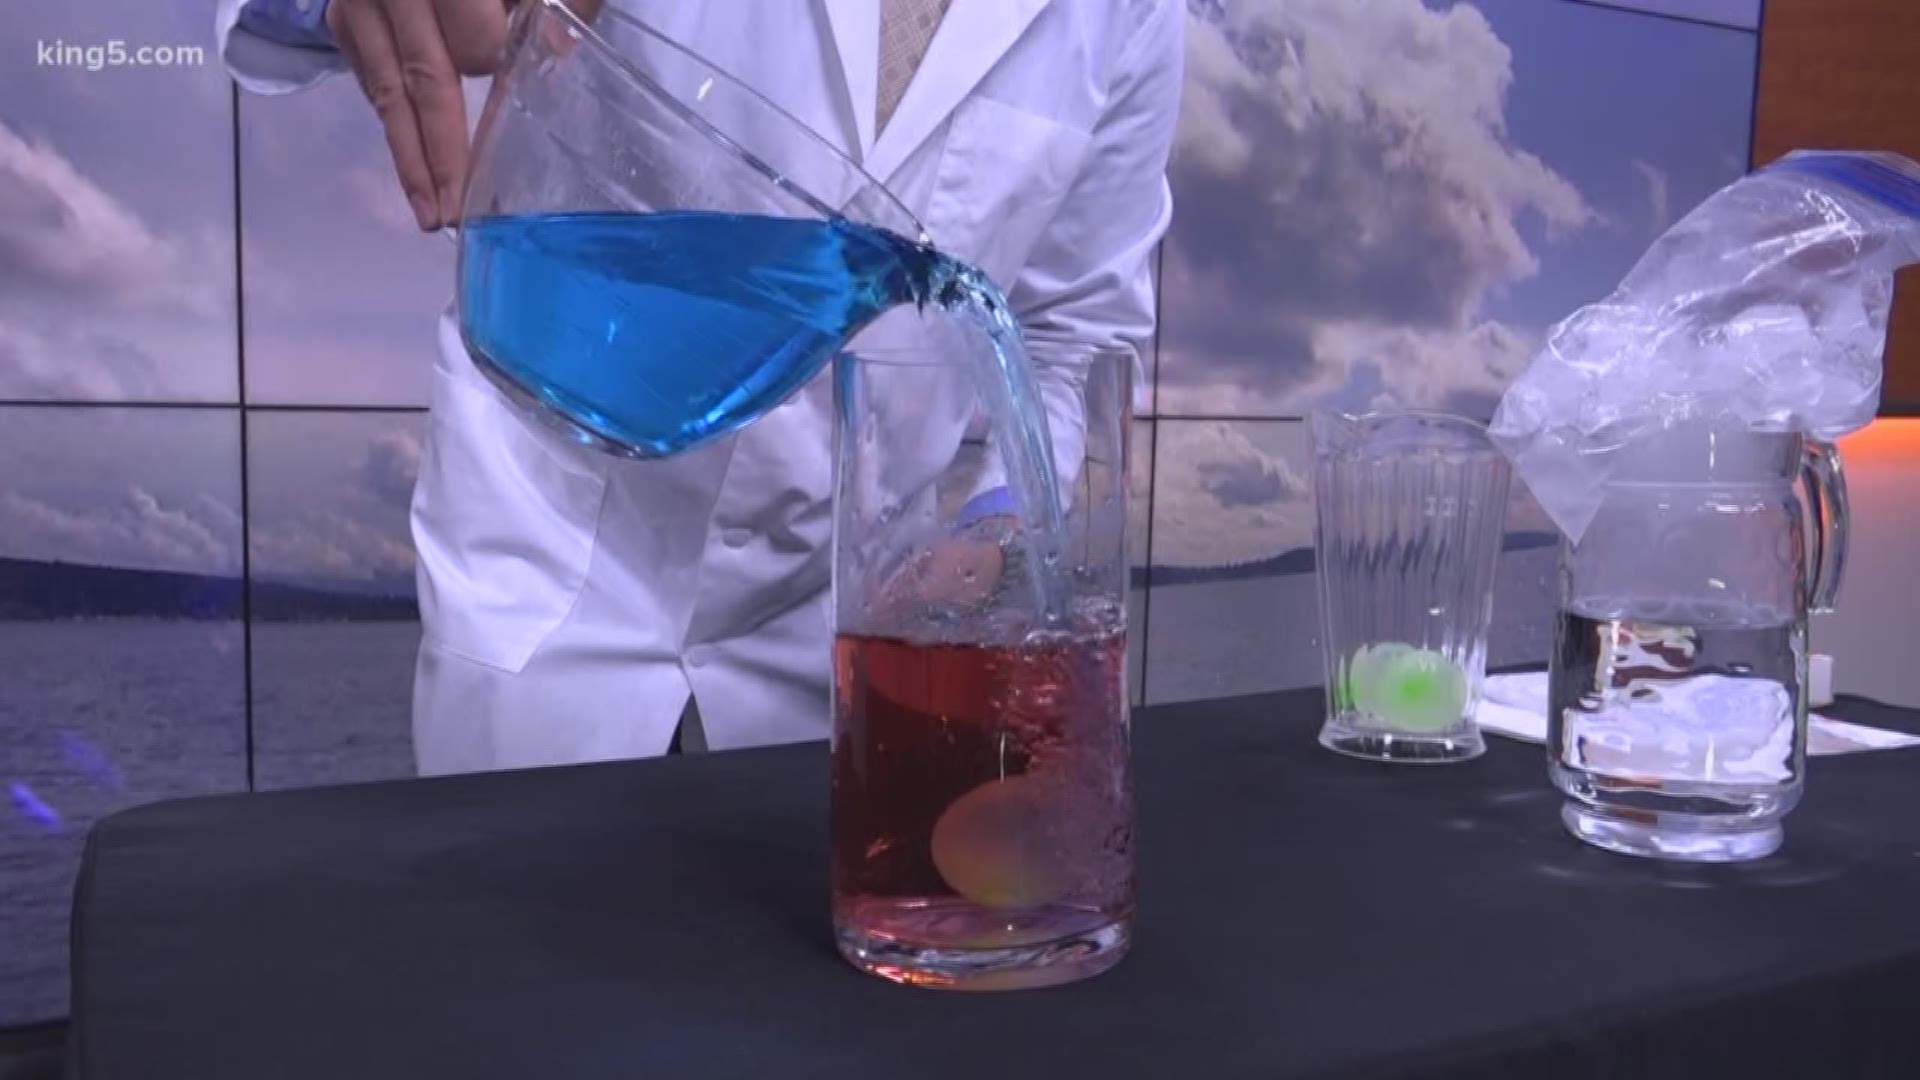 KING 5 Meteorologist Ben Dery shows how clouds, showers and thunderstorms form in the atmosphere with a science experiment.